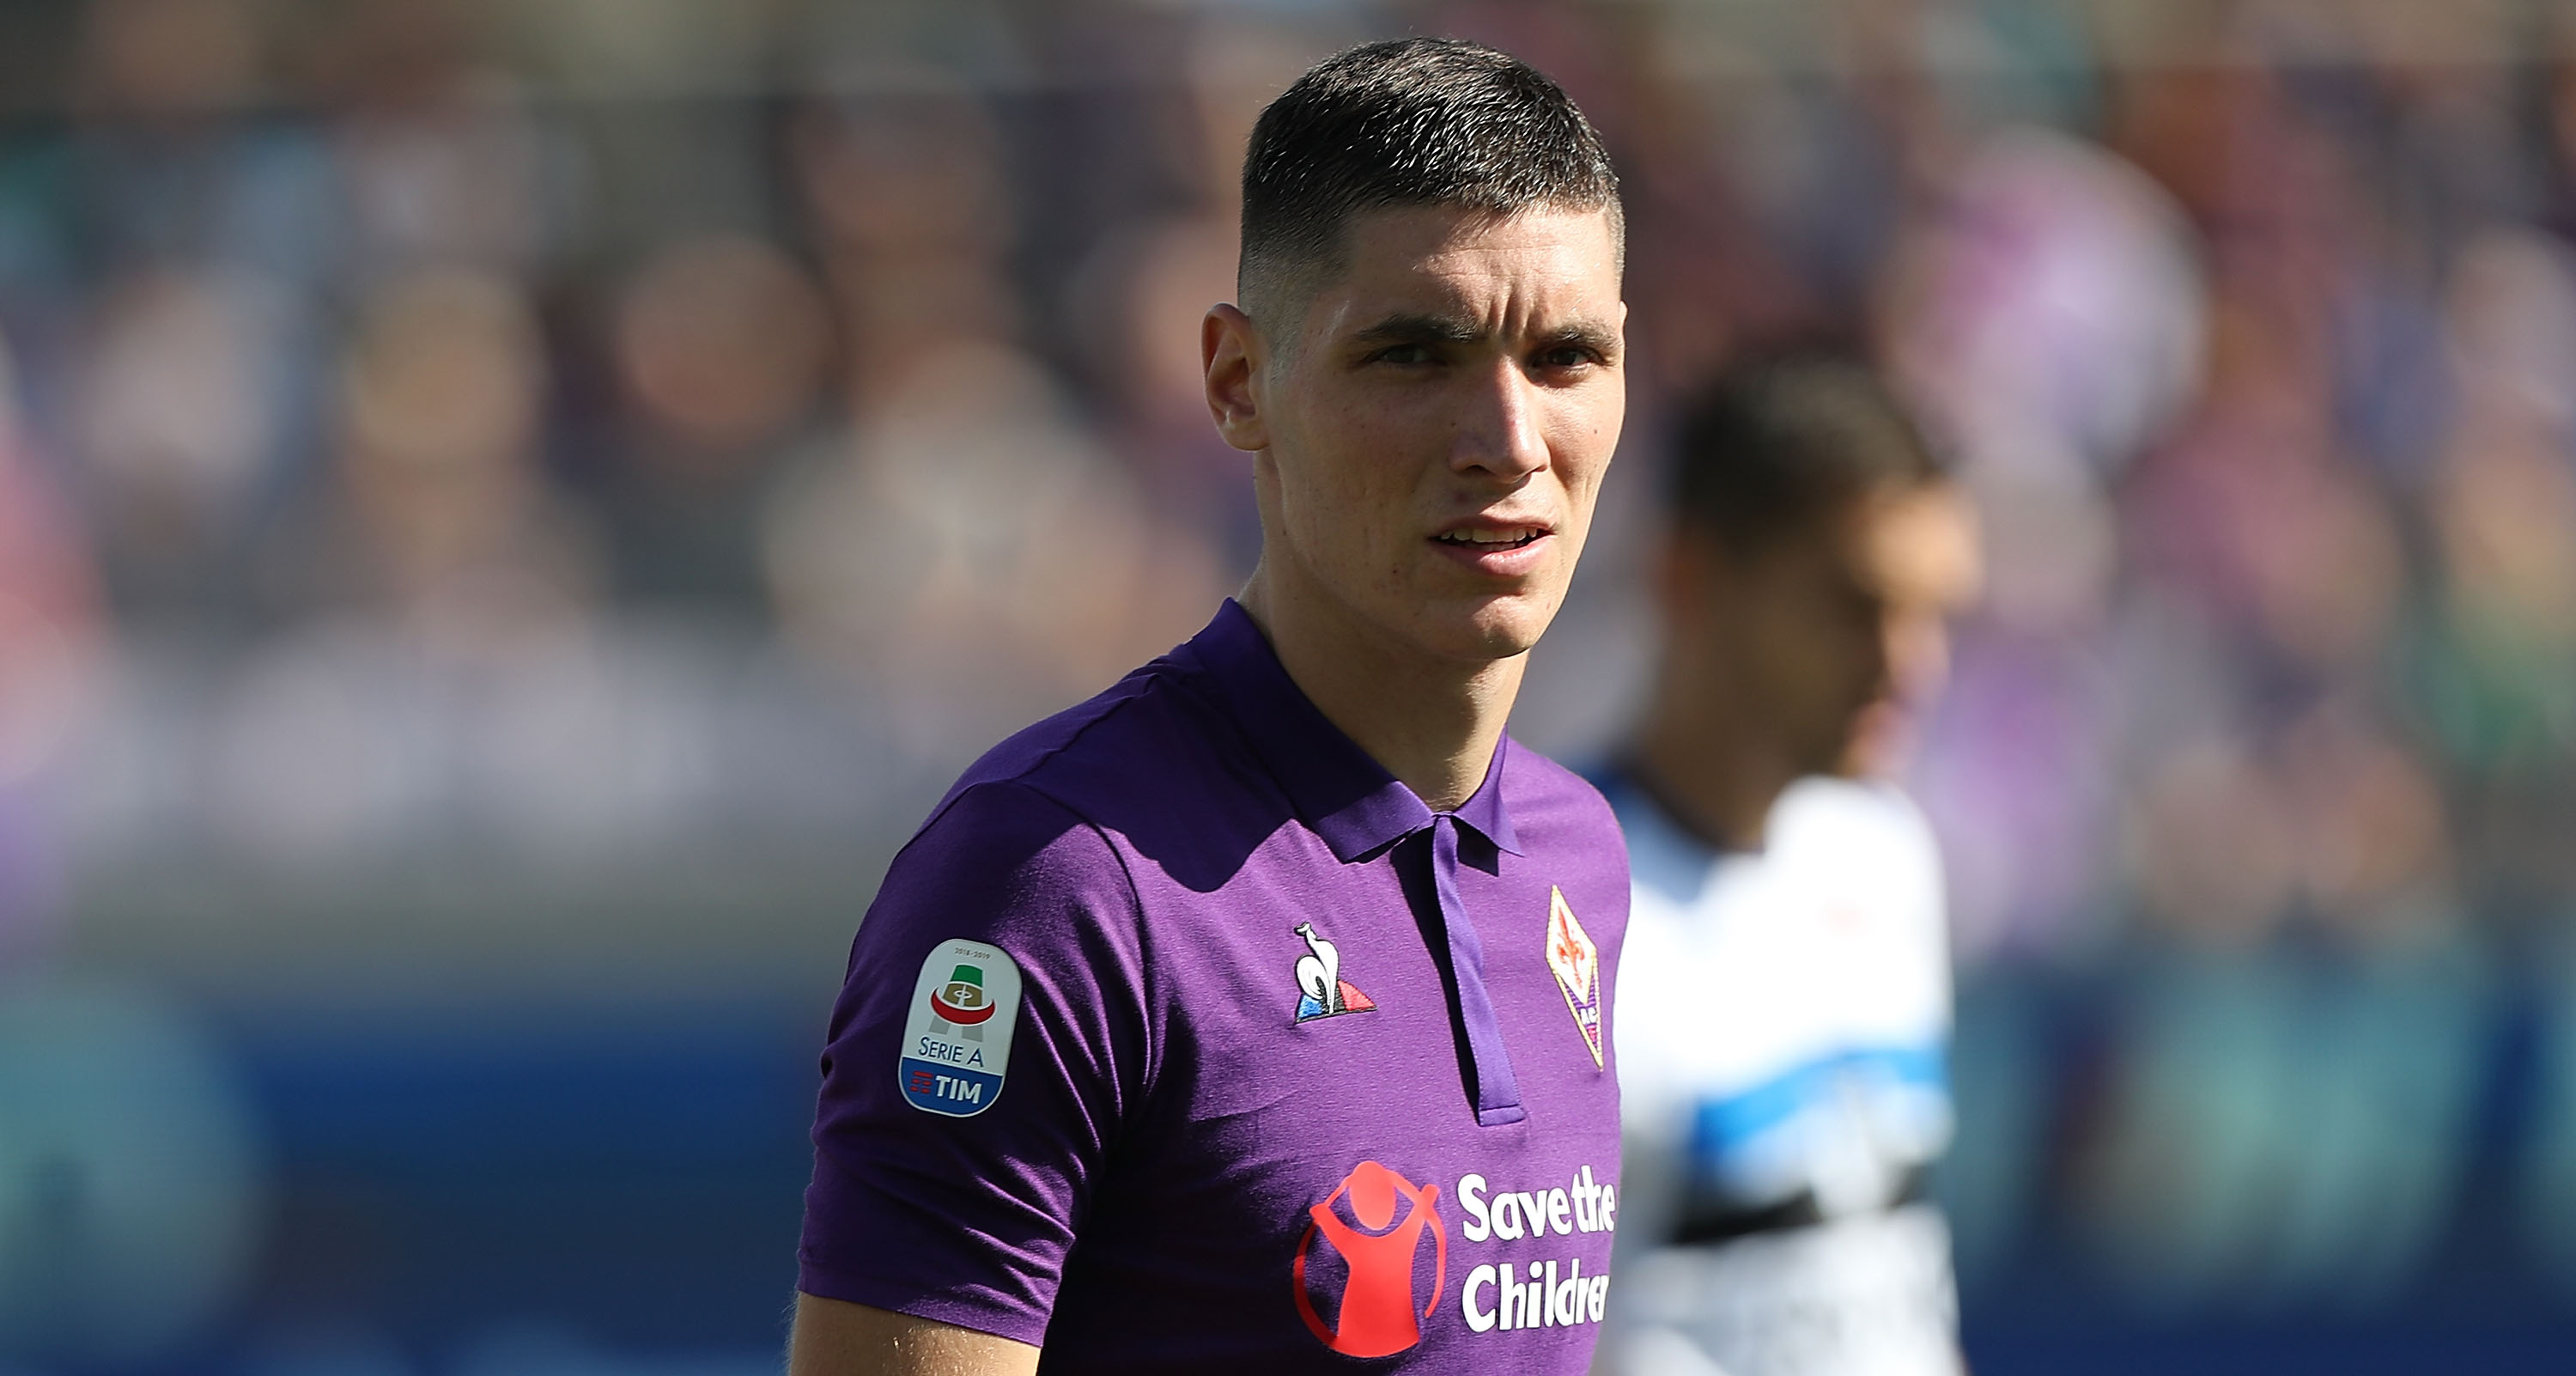 FLORENCE, ITALY - SEPTEMBER 30: Nikola Milenkovic of ACF Fiorentina looks on during the Serie A match between ACF Fiorentina and Atalanta BC at Stadio Artemio Franchi on September 30, 2018 in Florence, Italy.  (Photo by Gabriele Maltinti/Getty Images)